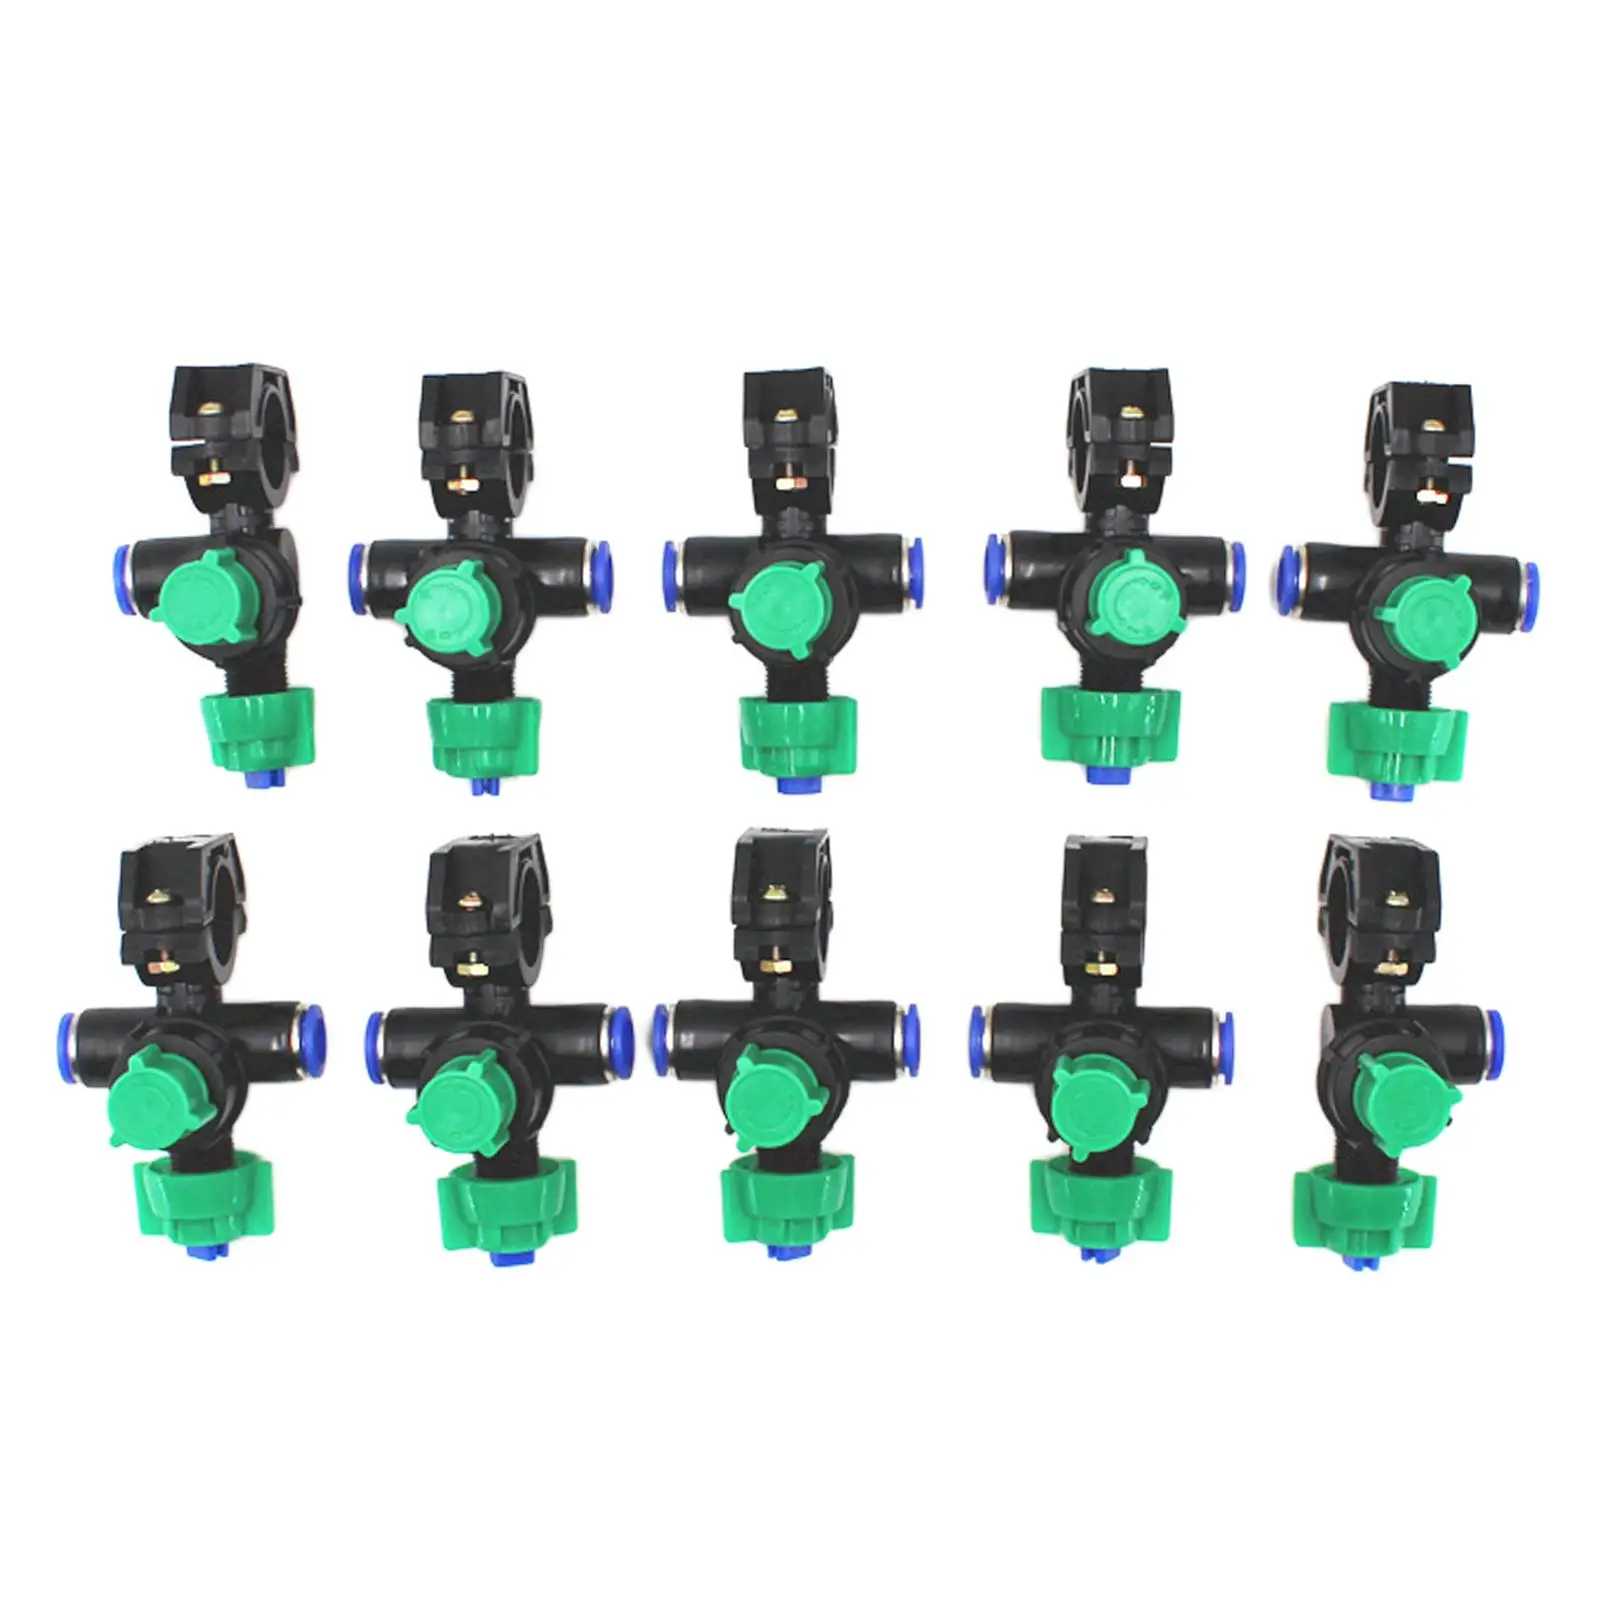 10pcs Agricultural Spray Head Misting System Head for Horticulture, Greenhouse Watering Nozzle Flower Irrigation Fog Sprayer